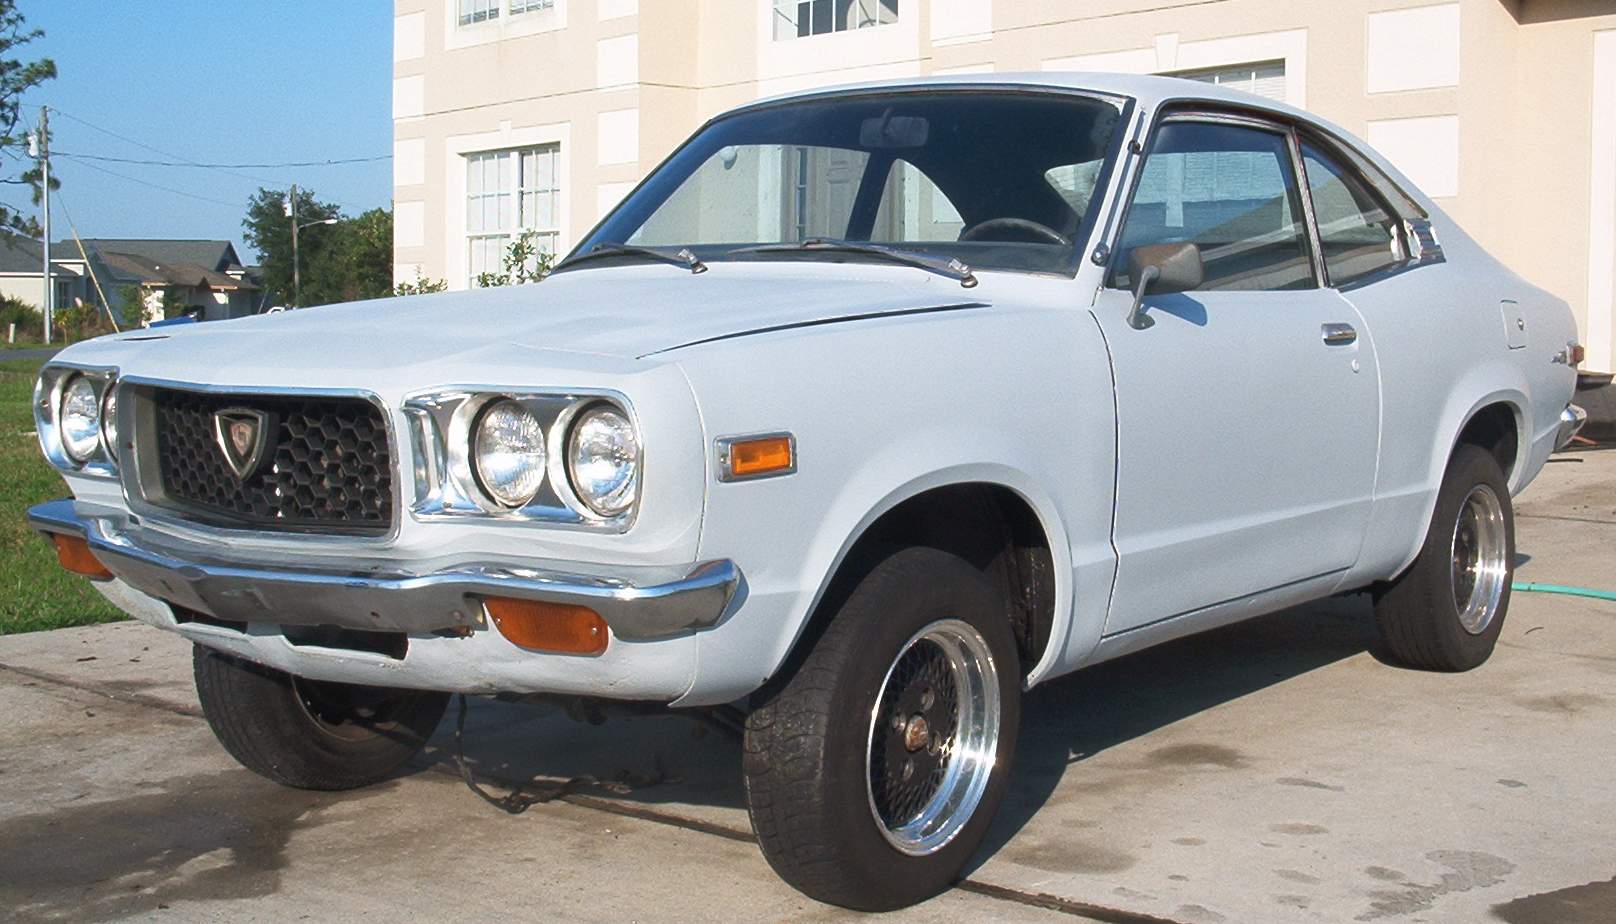 1972 Mazda RX3 in Kissimmee Florida for sale! 